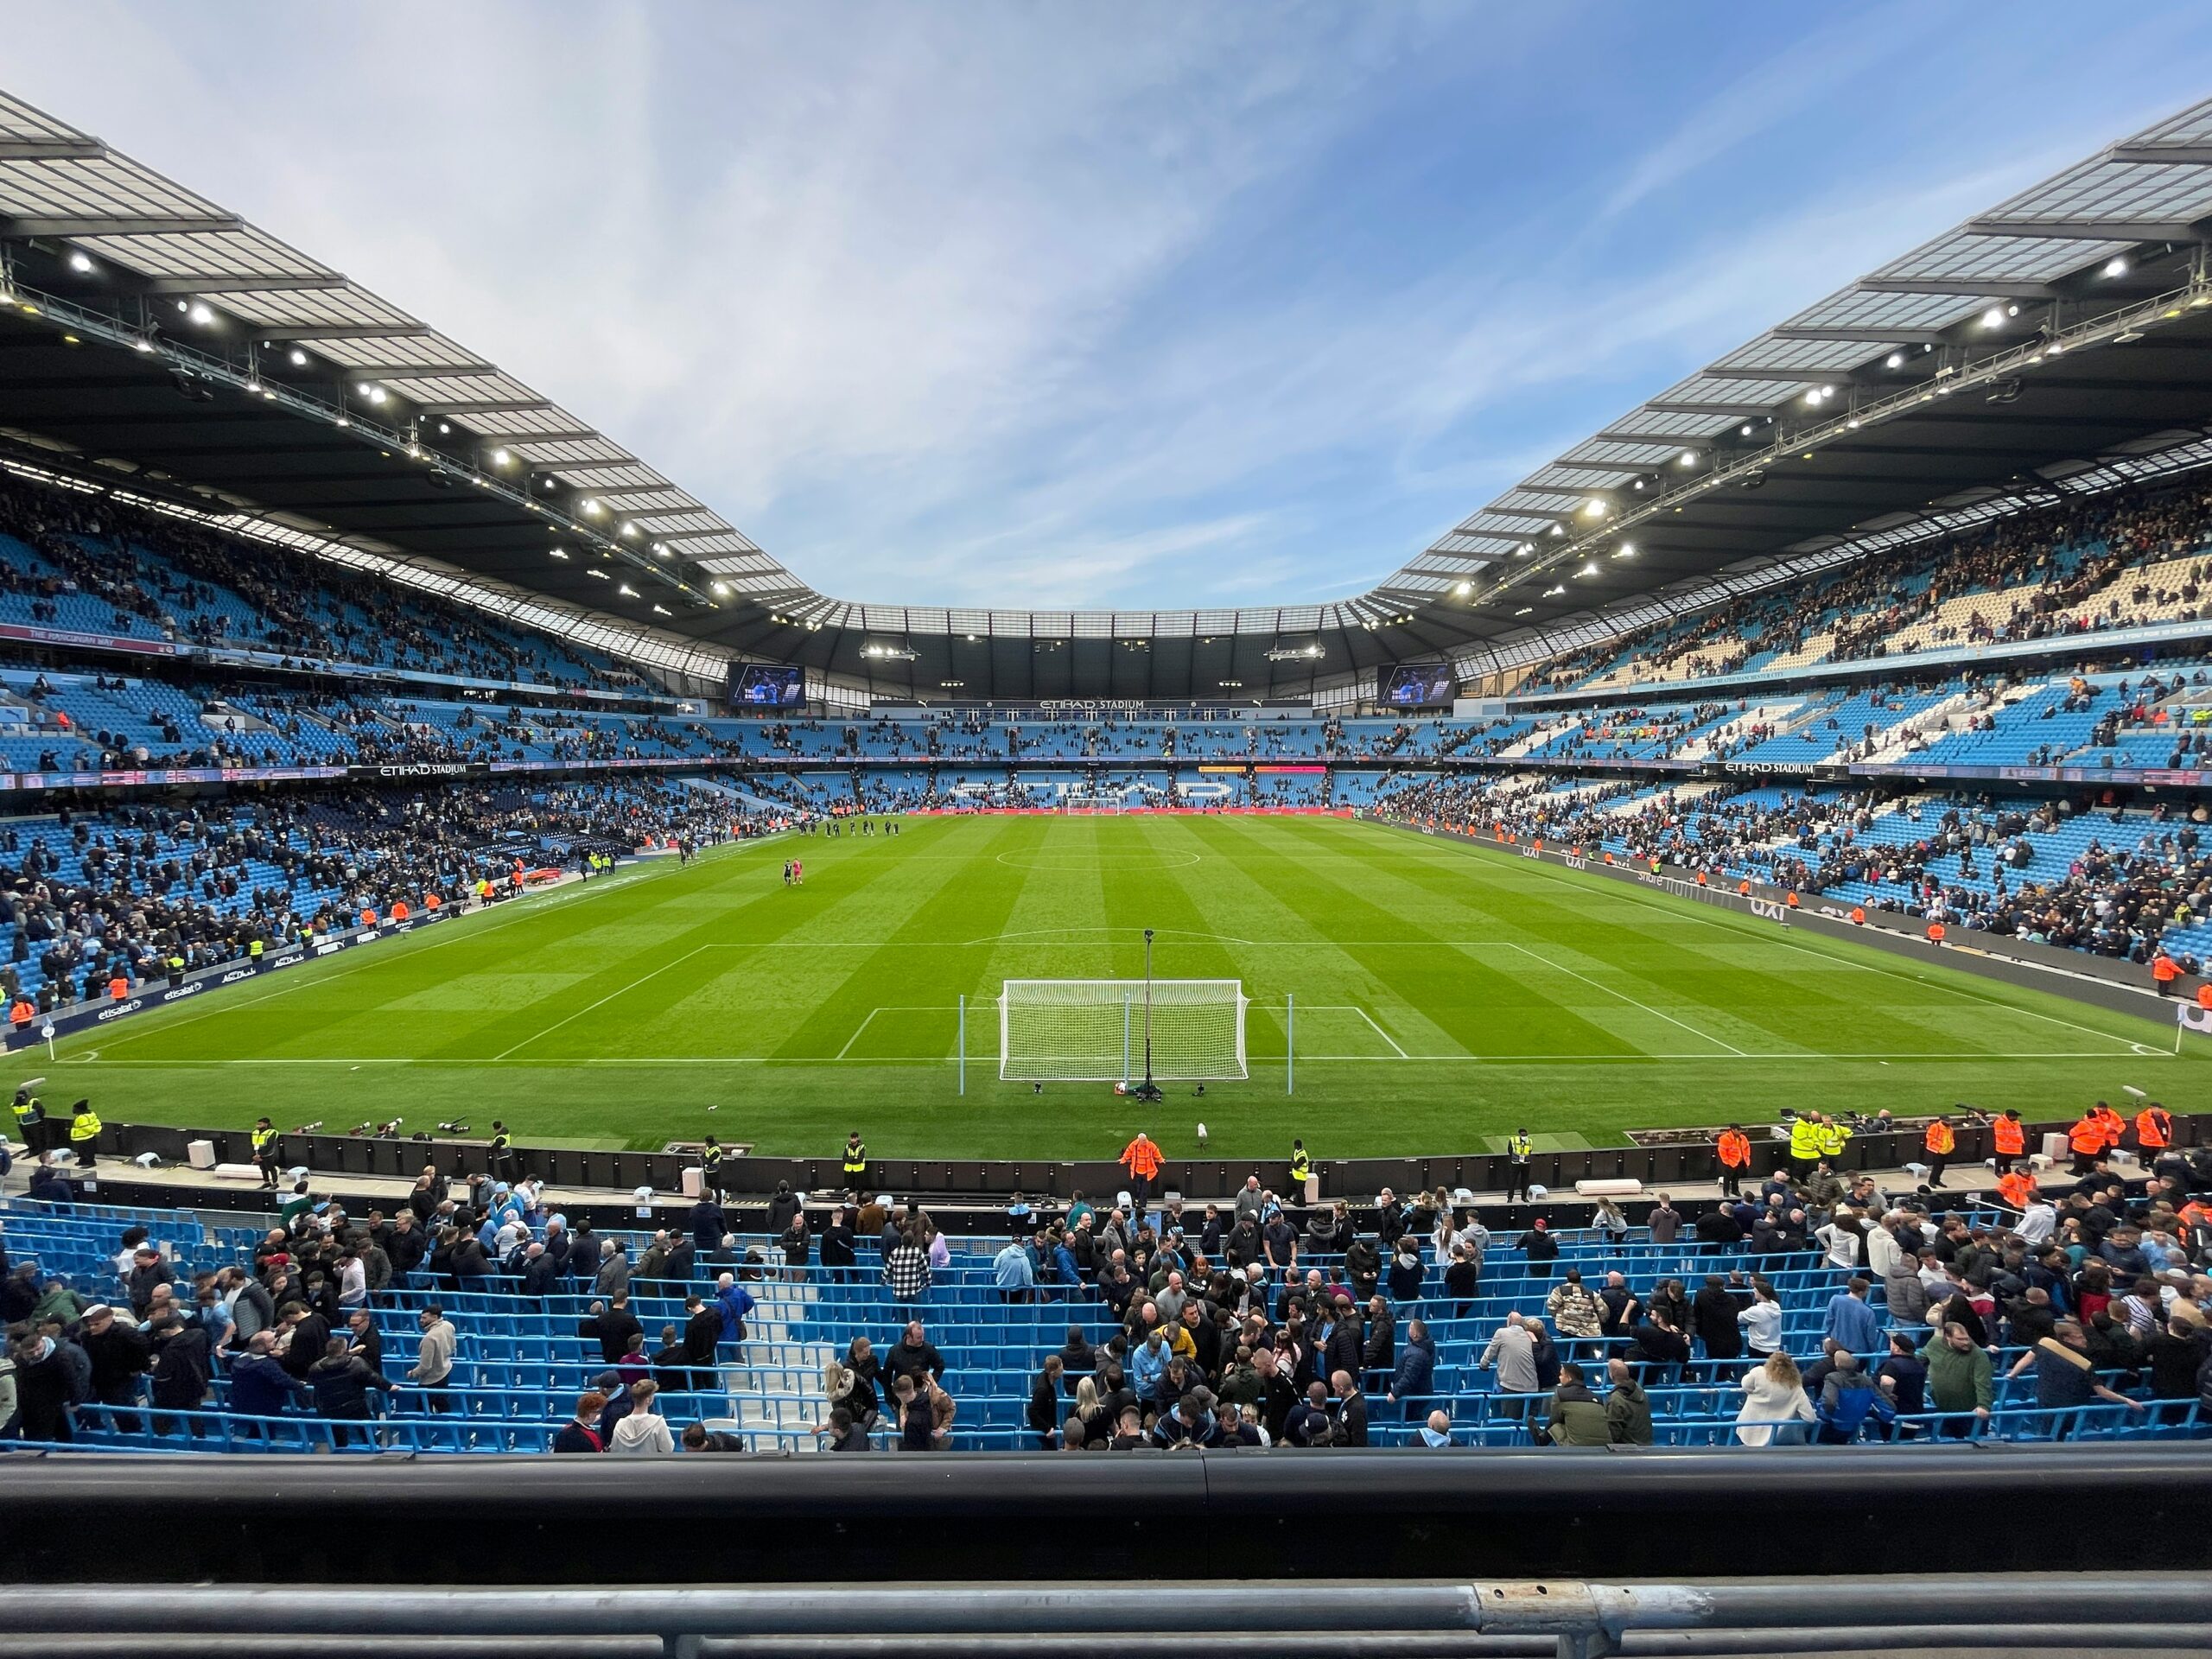 Manchester City will be aiming for a new Premier League title on Sunday while Barry Manilow plays next door. Credit: Unsplash